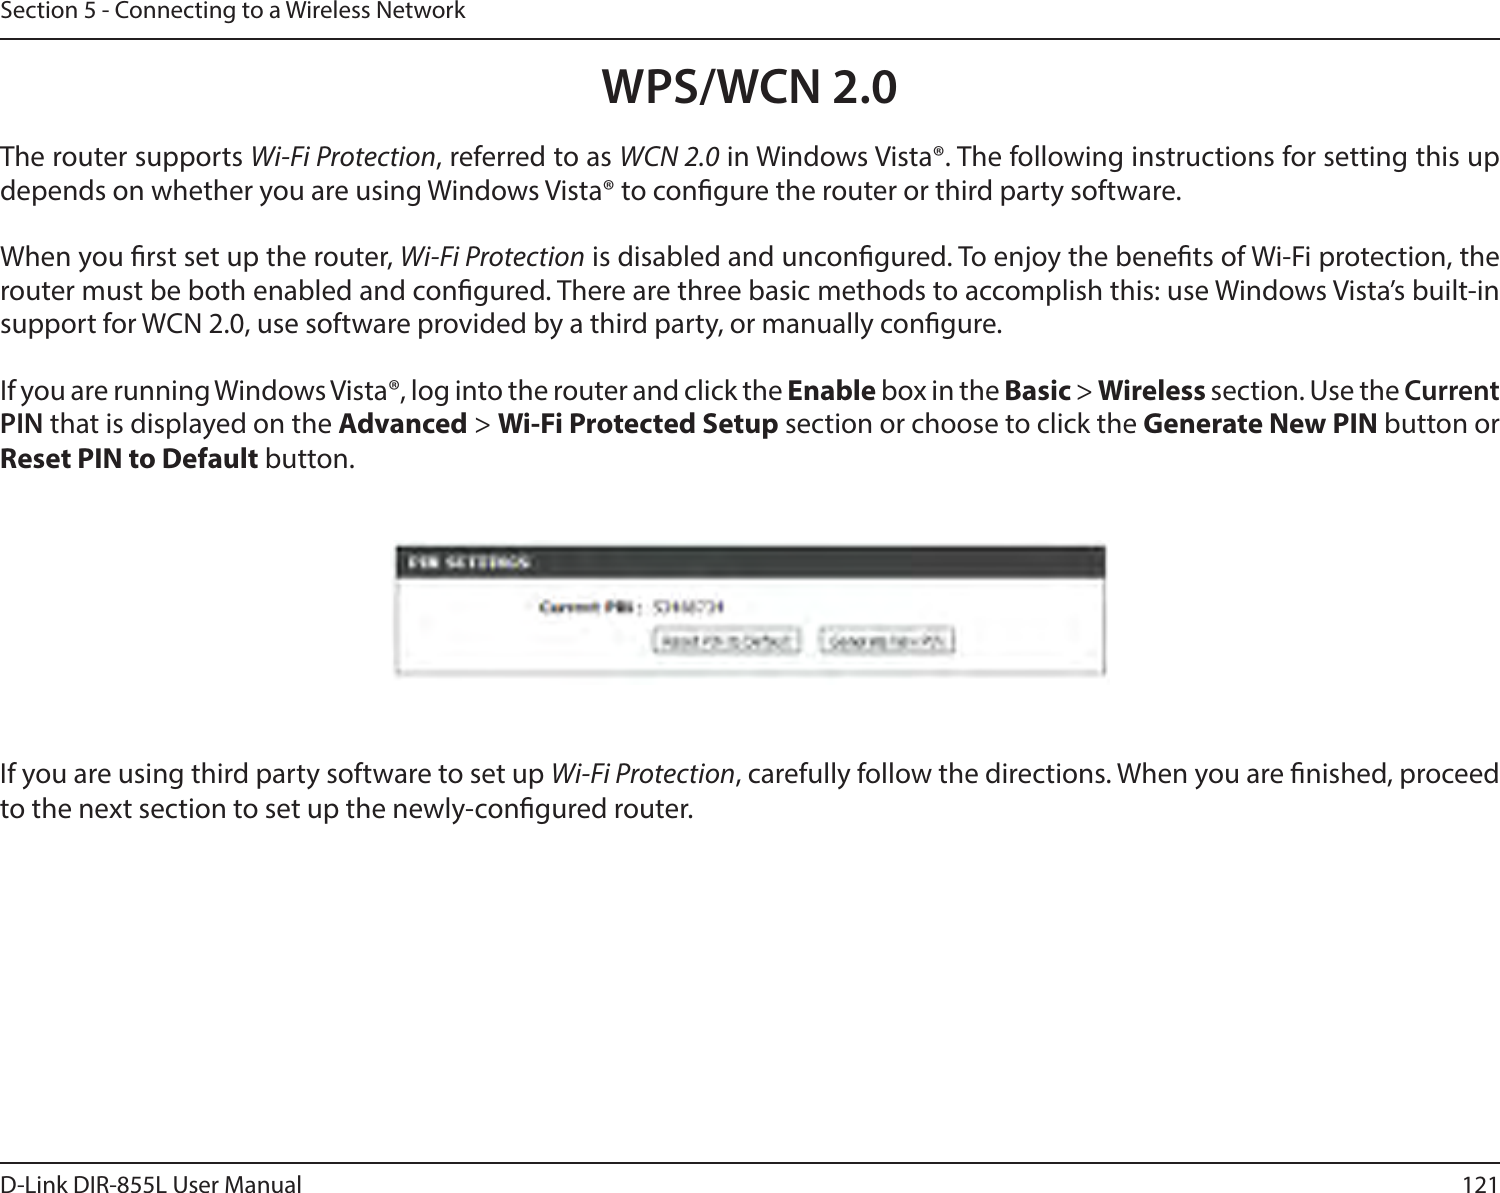 121D-Link DIR-855L User ManualSection 5 - Connecting to a Wireless NetworkWPS/WCN 2.0The router supports Wi-Fi Protection, referred to as WCN 2.0 in Windows Vista®. The following instructions for setting this up depends on whether you are using Windows Vista® to congure the router or third party software.        When you rst set up the router, Wi-Fi Protection is disabled and uncongured. To enjoy the benets of Wi-Fi protection, the router must be both enabled and congured. There are three basic methods to accomplish this: use Windows Vista’s built-in support for WCN 2.0, use software provided by a third party, or manually congure. If you are running Windows Vista®, log into the router and click the Enable box in the Basic &gt; Wireless section. Use the Current PIN that is displayed on the Advanced &gt; Wi-FiProtectedSetup section or choose to click the Generate New PIN button or Reset PIN to Default button. If you are using third party software to set up Wi-Fi Protection, carefully follow the directions. When you are nished, proceed to the next section to set up the newly-congured router. 